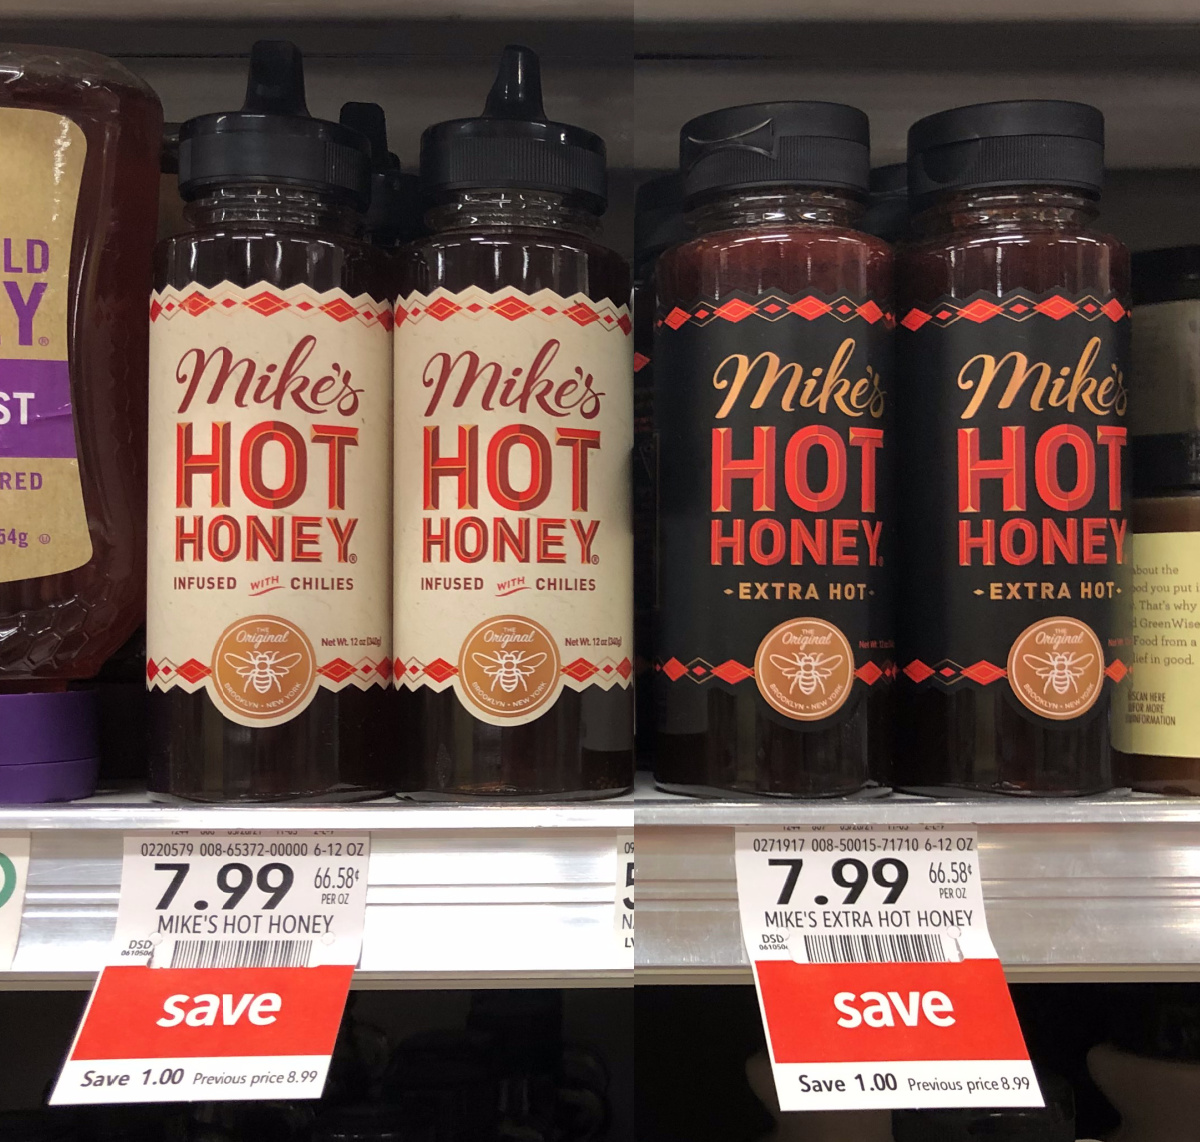 Grab A Bottle Of Mike’s Hot Honey - Extra Hot For All Your Favorite Summer Meals on I Heart Publix